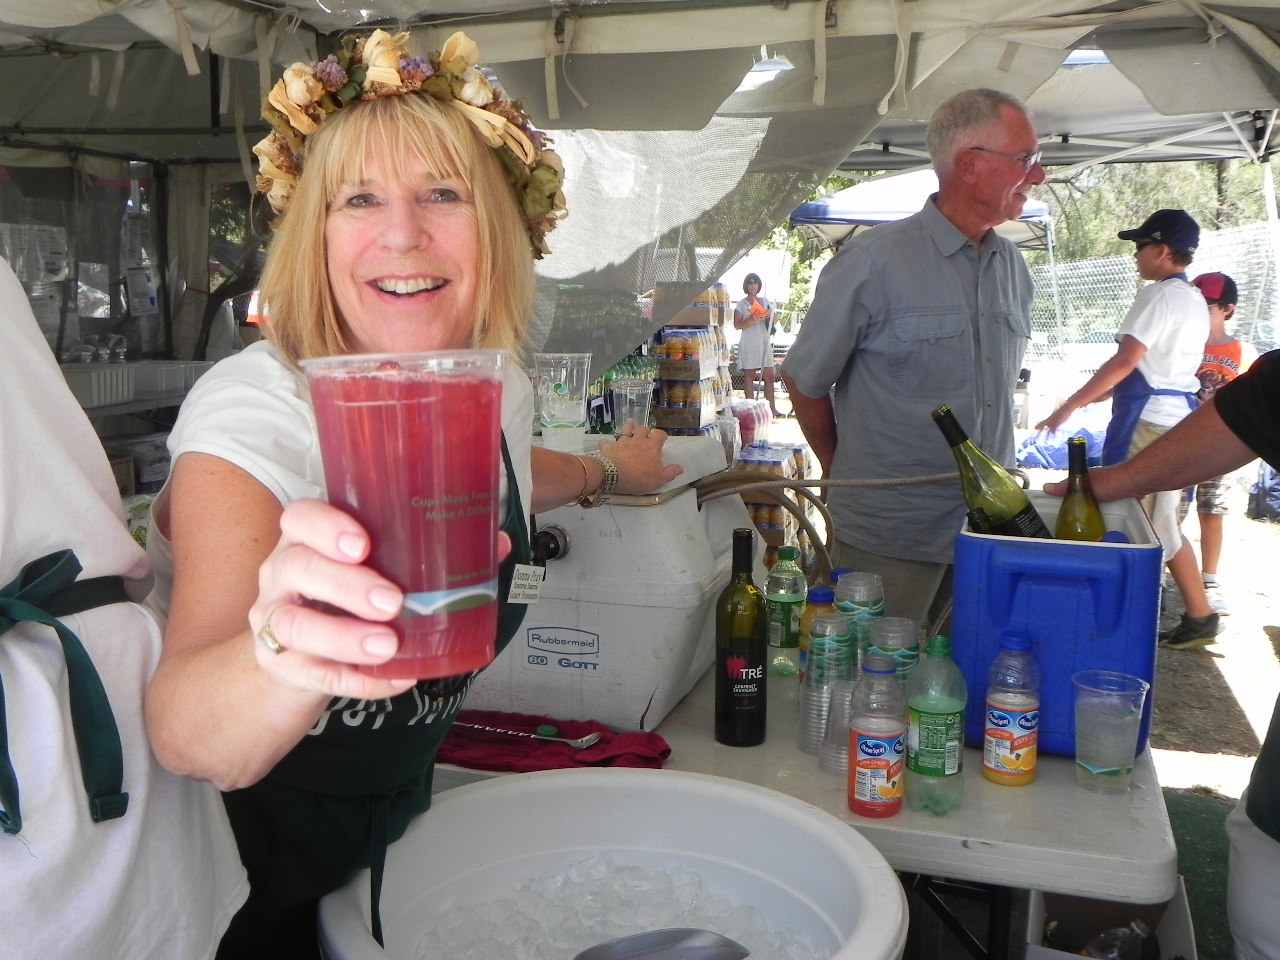 Homemade sangria was a popular item at the festival. It was second only to beer. Photo: Gina Scialabba